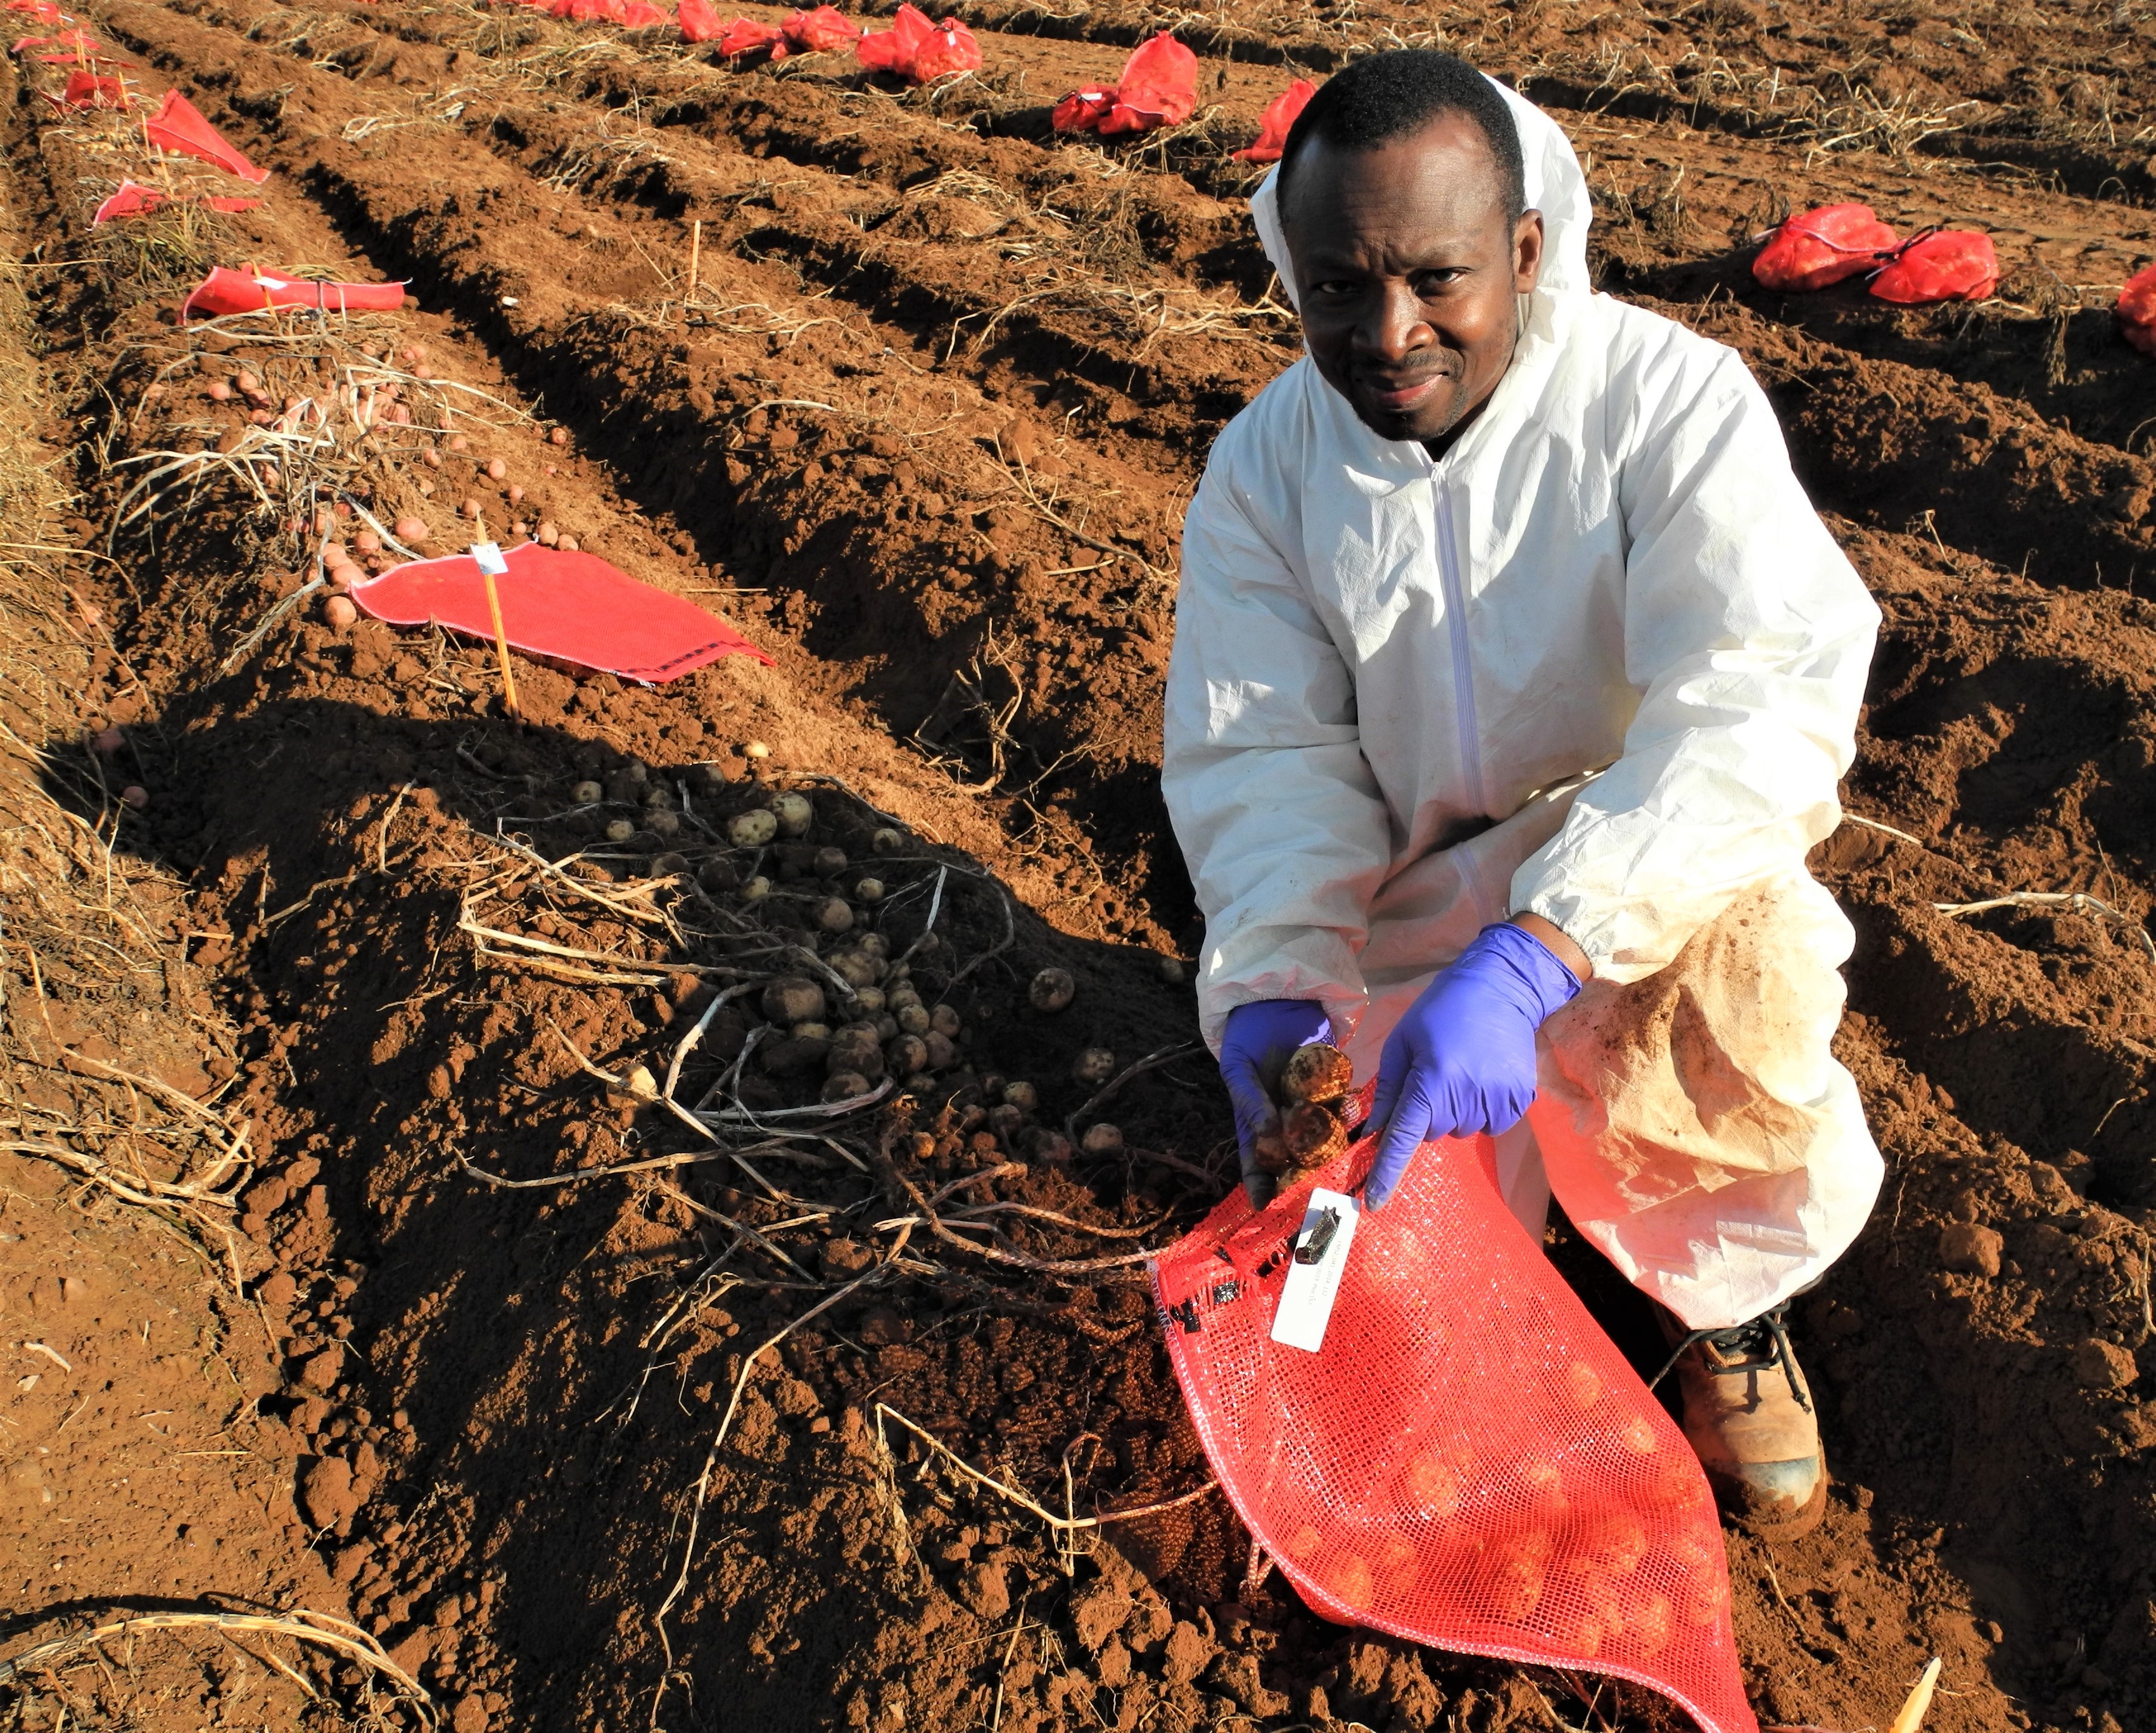 A person holding a potato collection sack while kneeling in a field of potatoes dug from the soil.